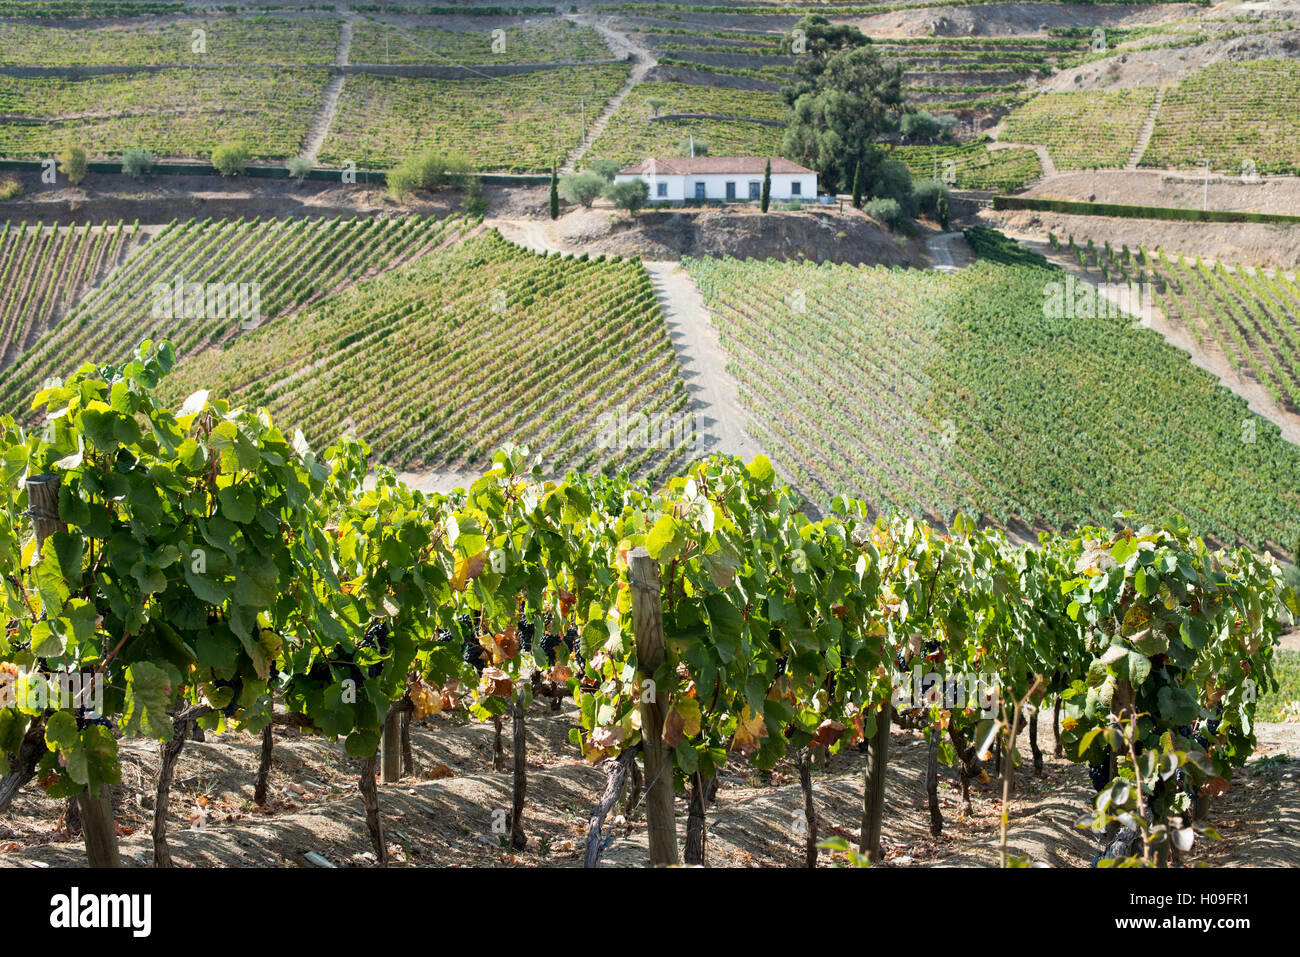 Grape vines ripening in the sun at a vineyard in the Alto Douro, Portugal, Europe Stock Photo